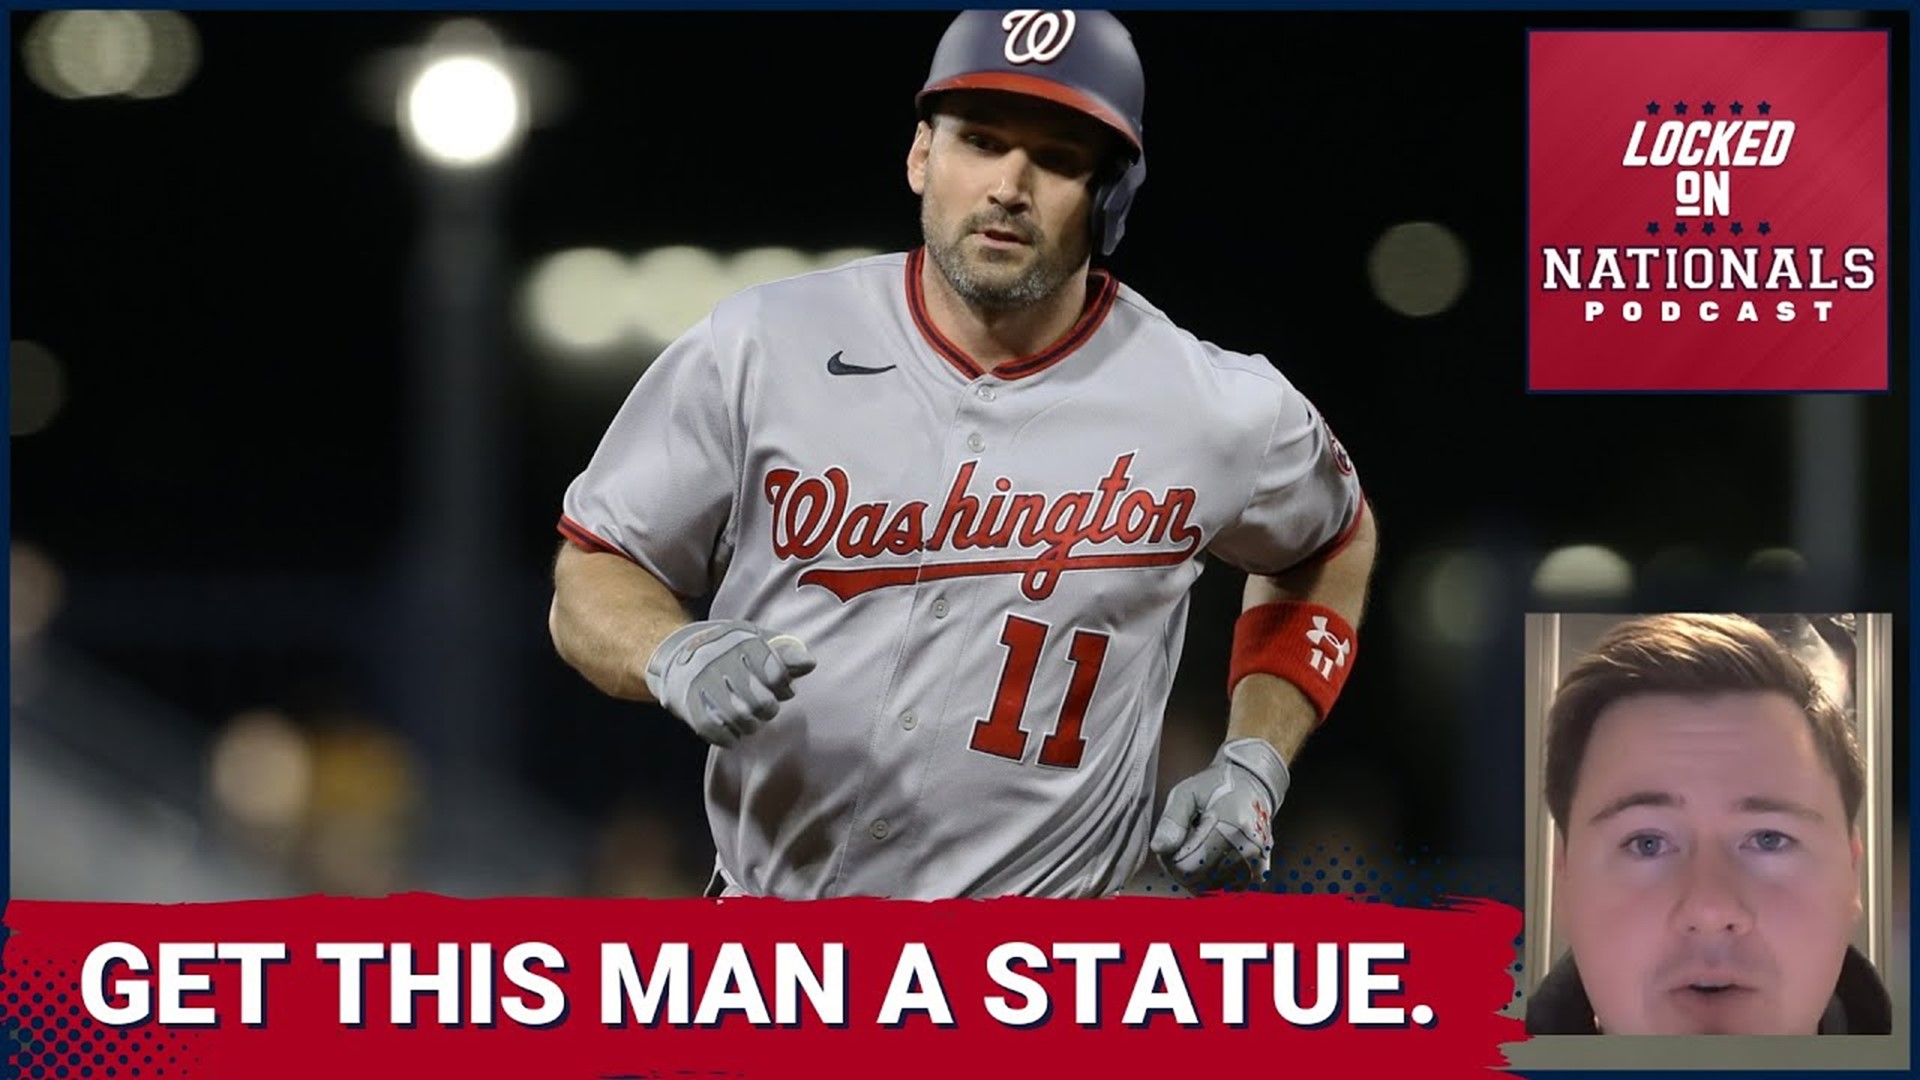 If there was a legendary Washington Nationals player that you would build a statue for, who would it be?